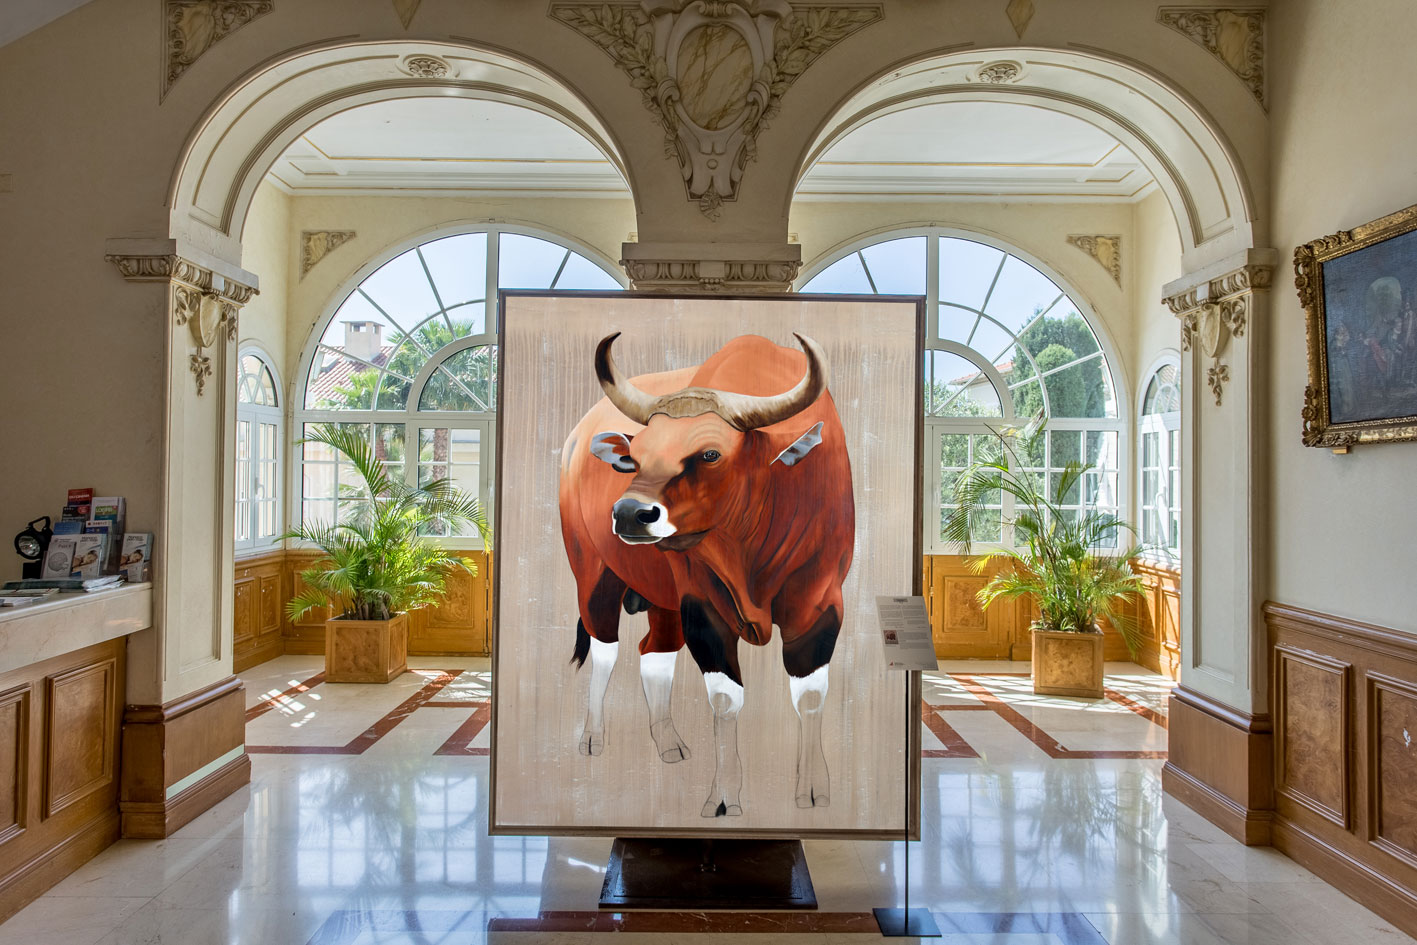 MAIRIE DE MONACO banteng-bos-javanicus-asian-red-bull-threatened-endangered-extinction Thierry Bisch Contemporary painter animals painting art  nature biodiversity conservation 